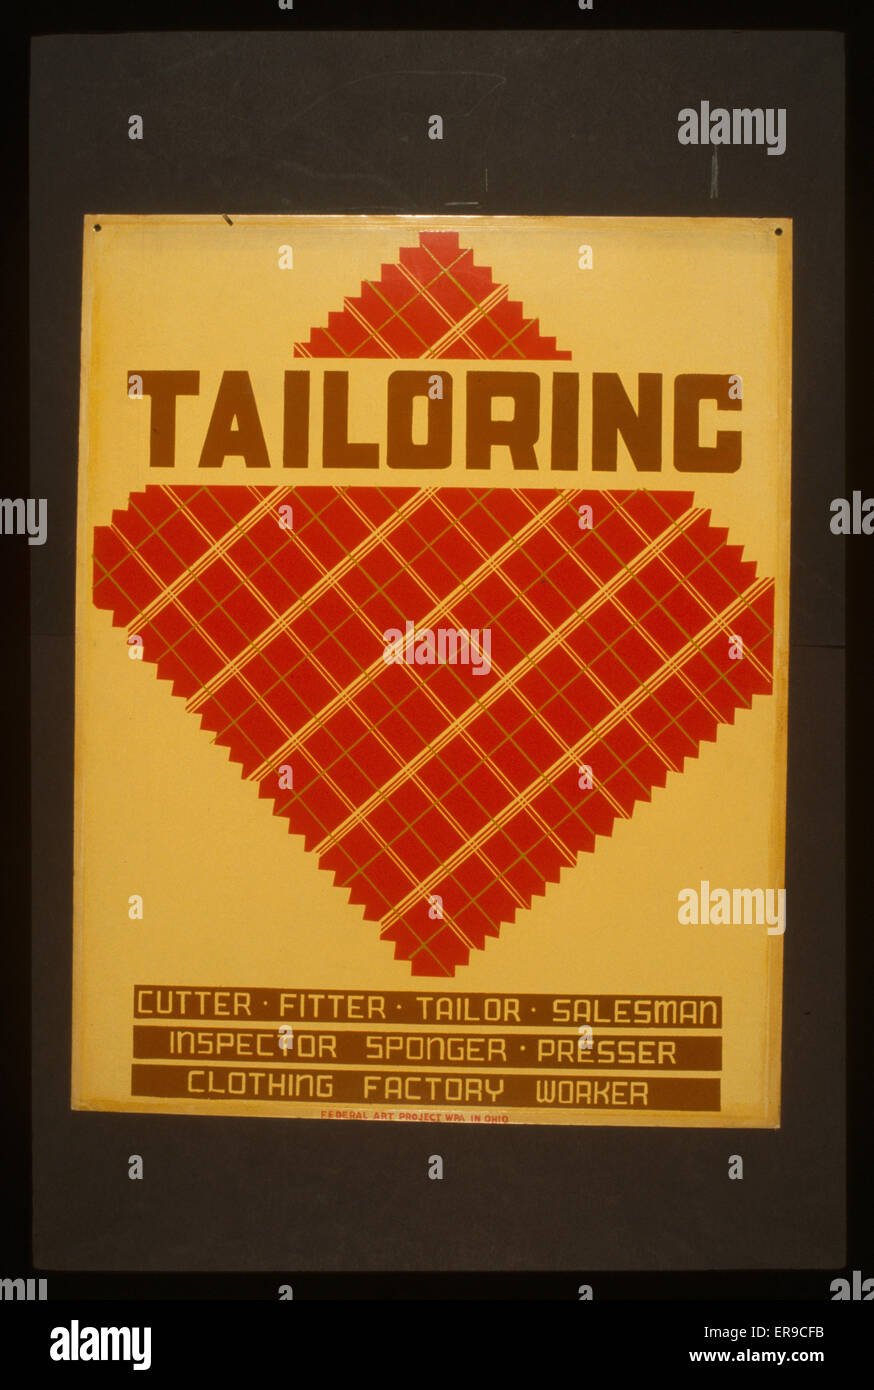 Tailoring. Poster promoting occupations related to tailoring, such as cutter, fitter , tailor, salesman, inspector, sponger, presser, clothing factor worker, showing a swatch of cloth. Date 1937. Stock Photo